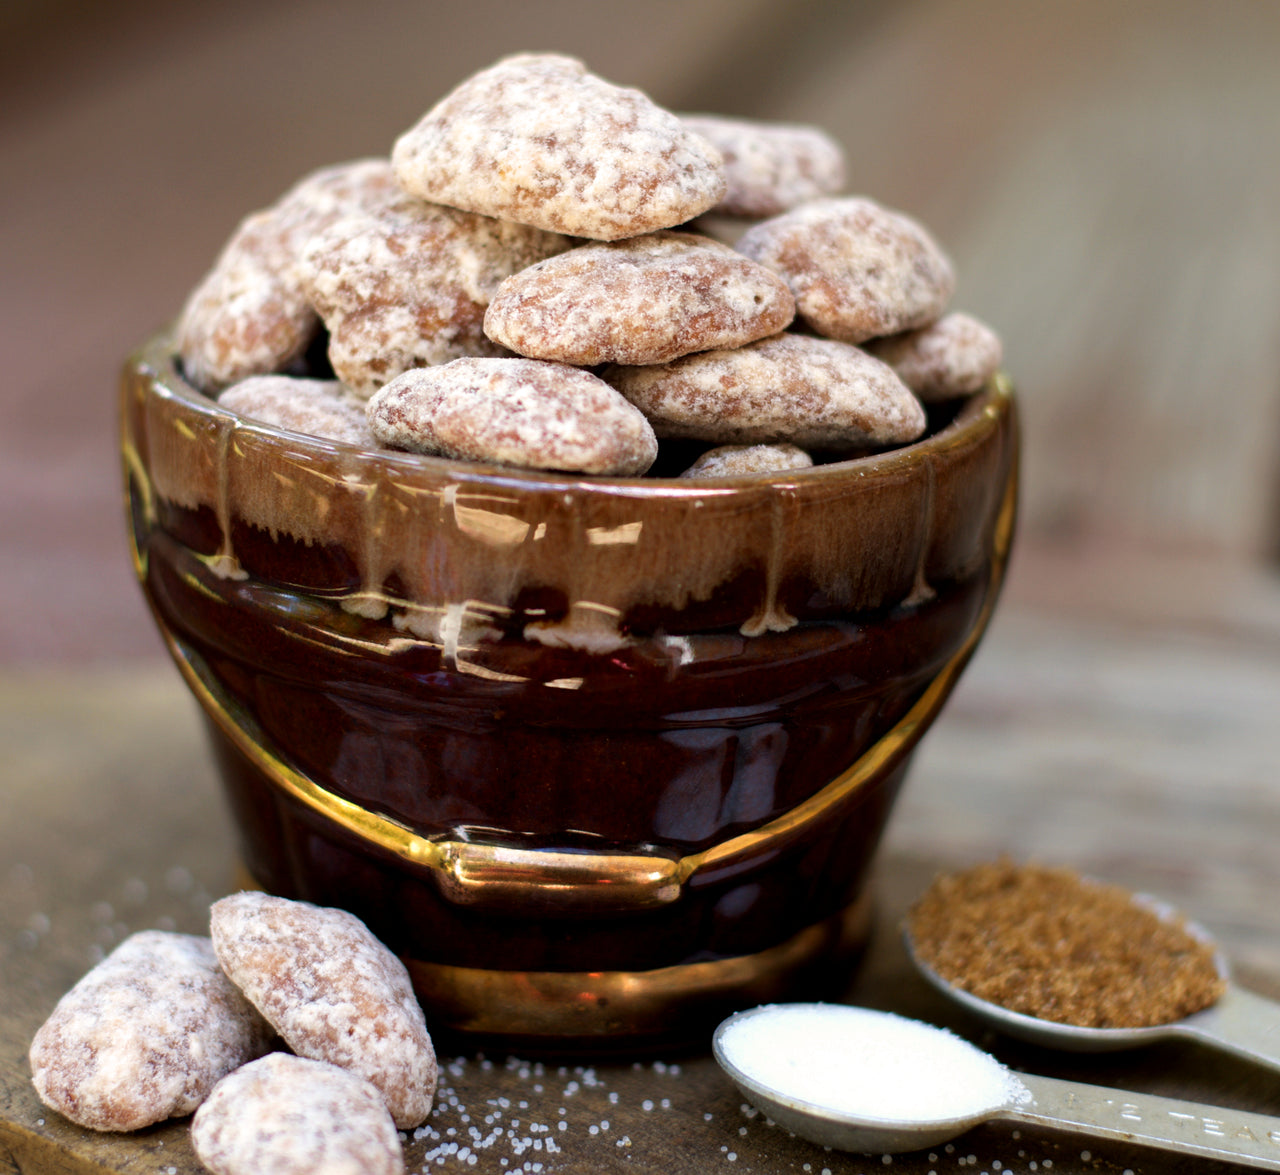 Our Southern Praline Pecans are glazed to perfection. You can enjoy these yourself or ship out as a gift!